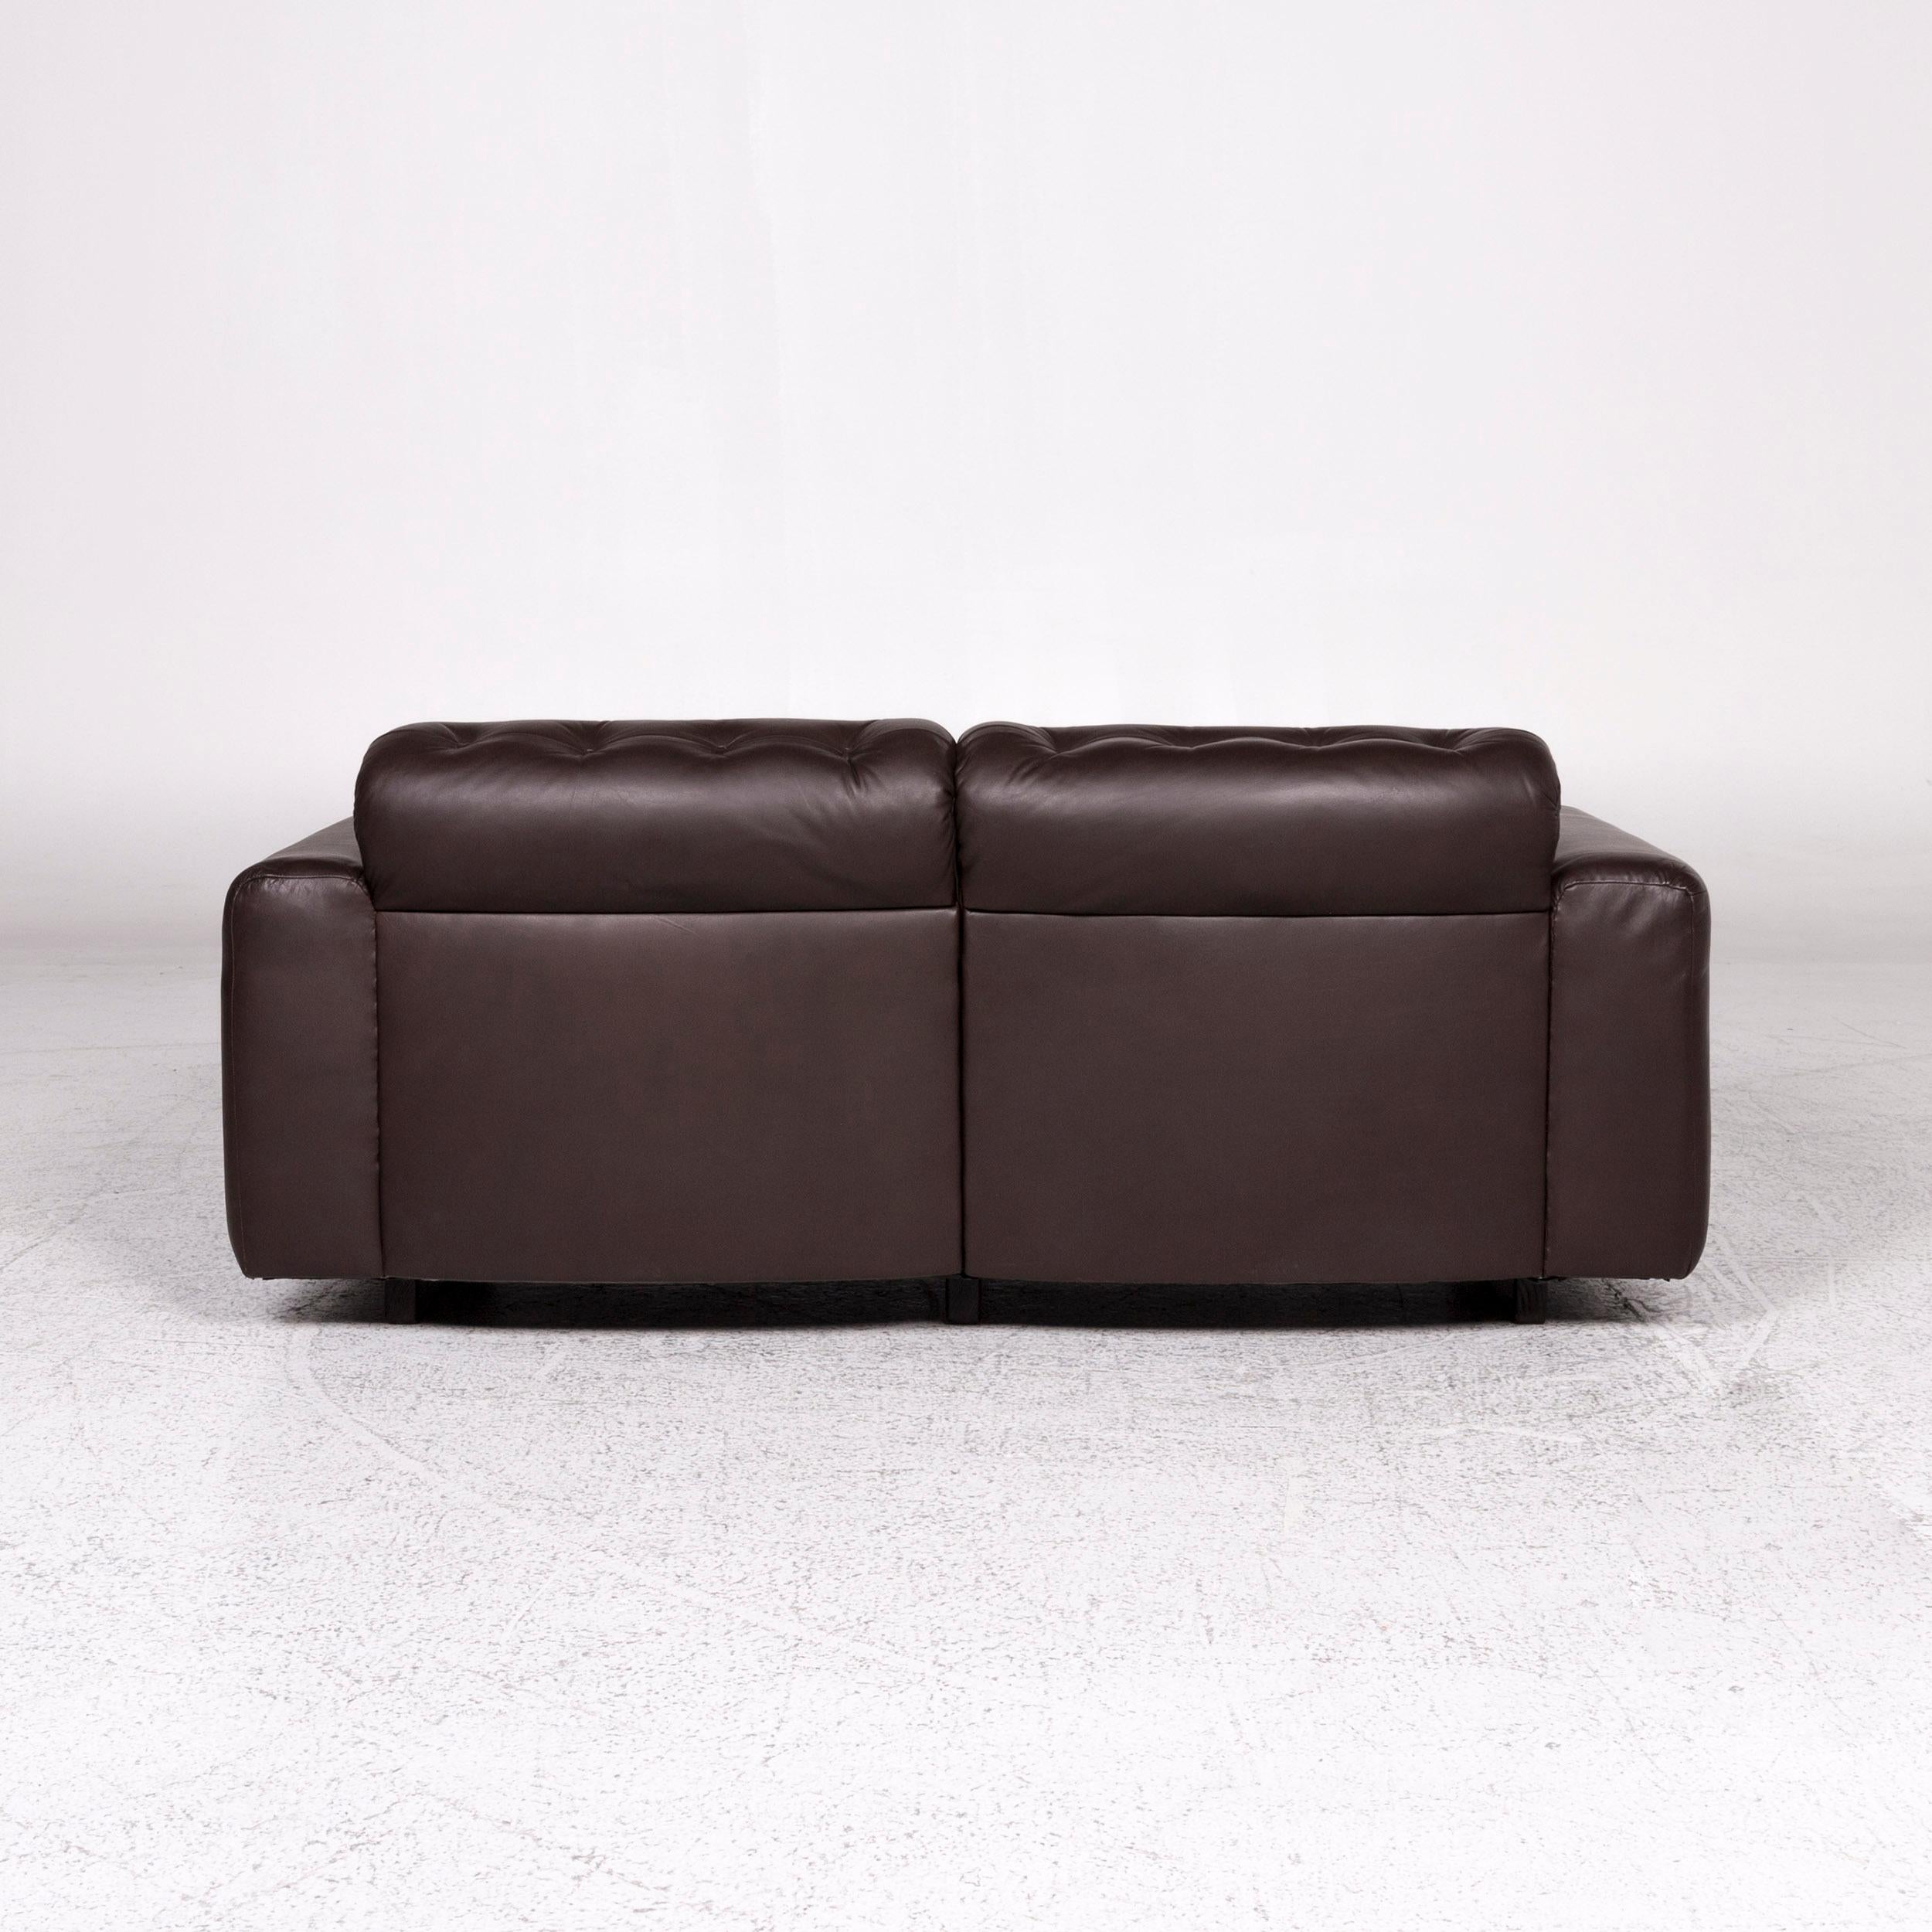 De Sede Leather Sofa Brown Two-Seat Couch 1